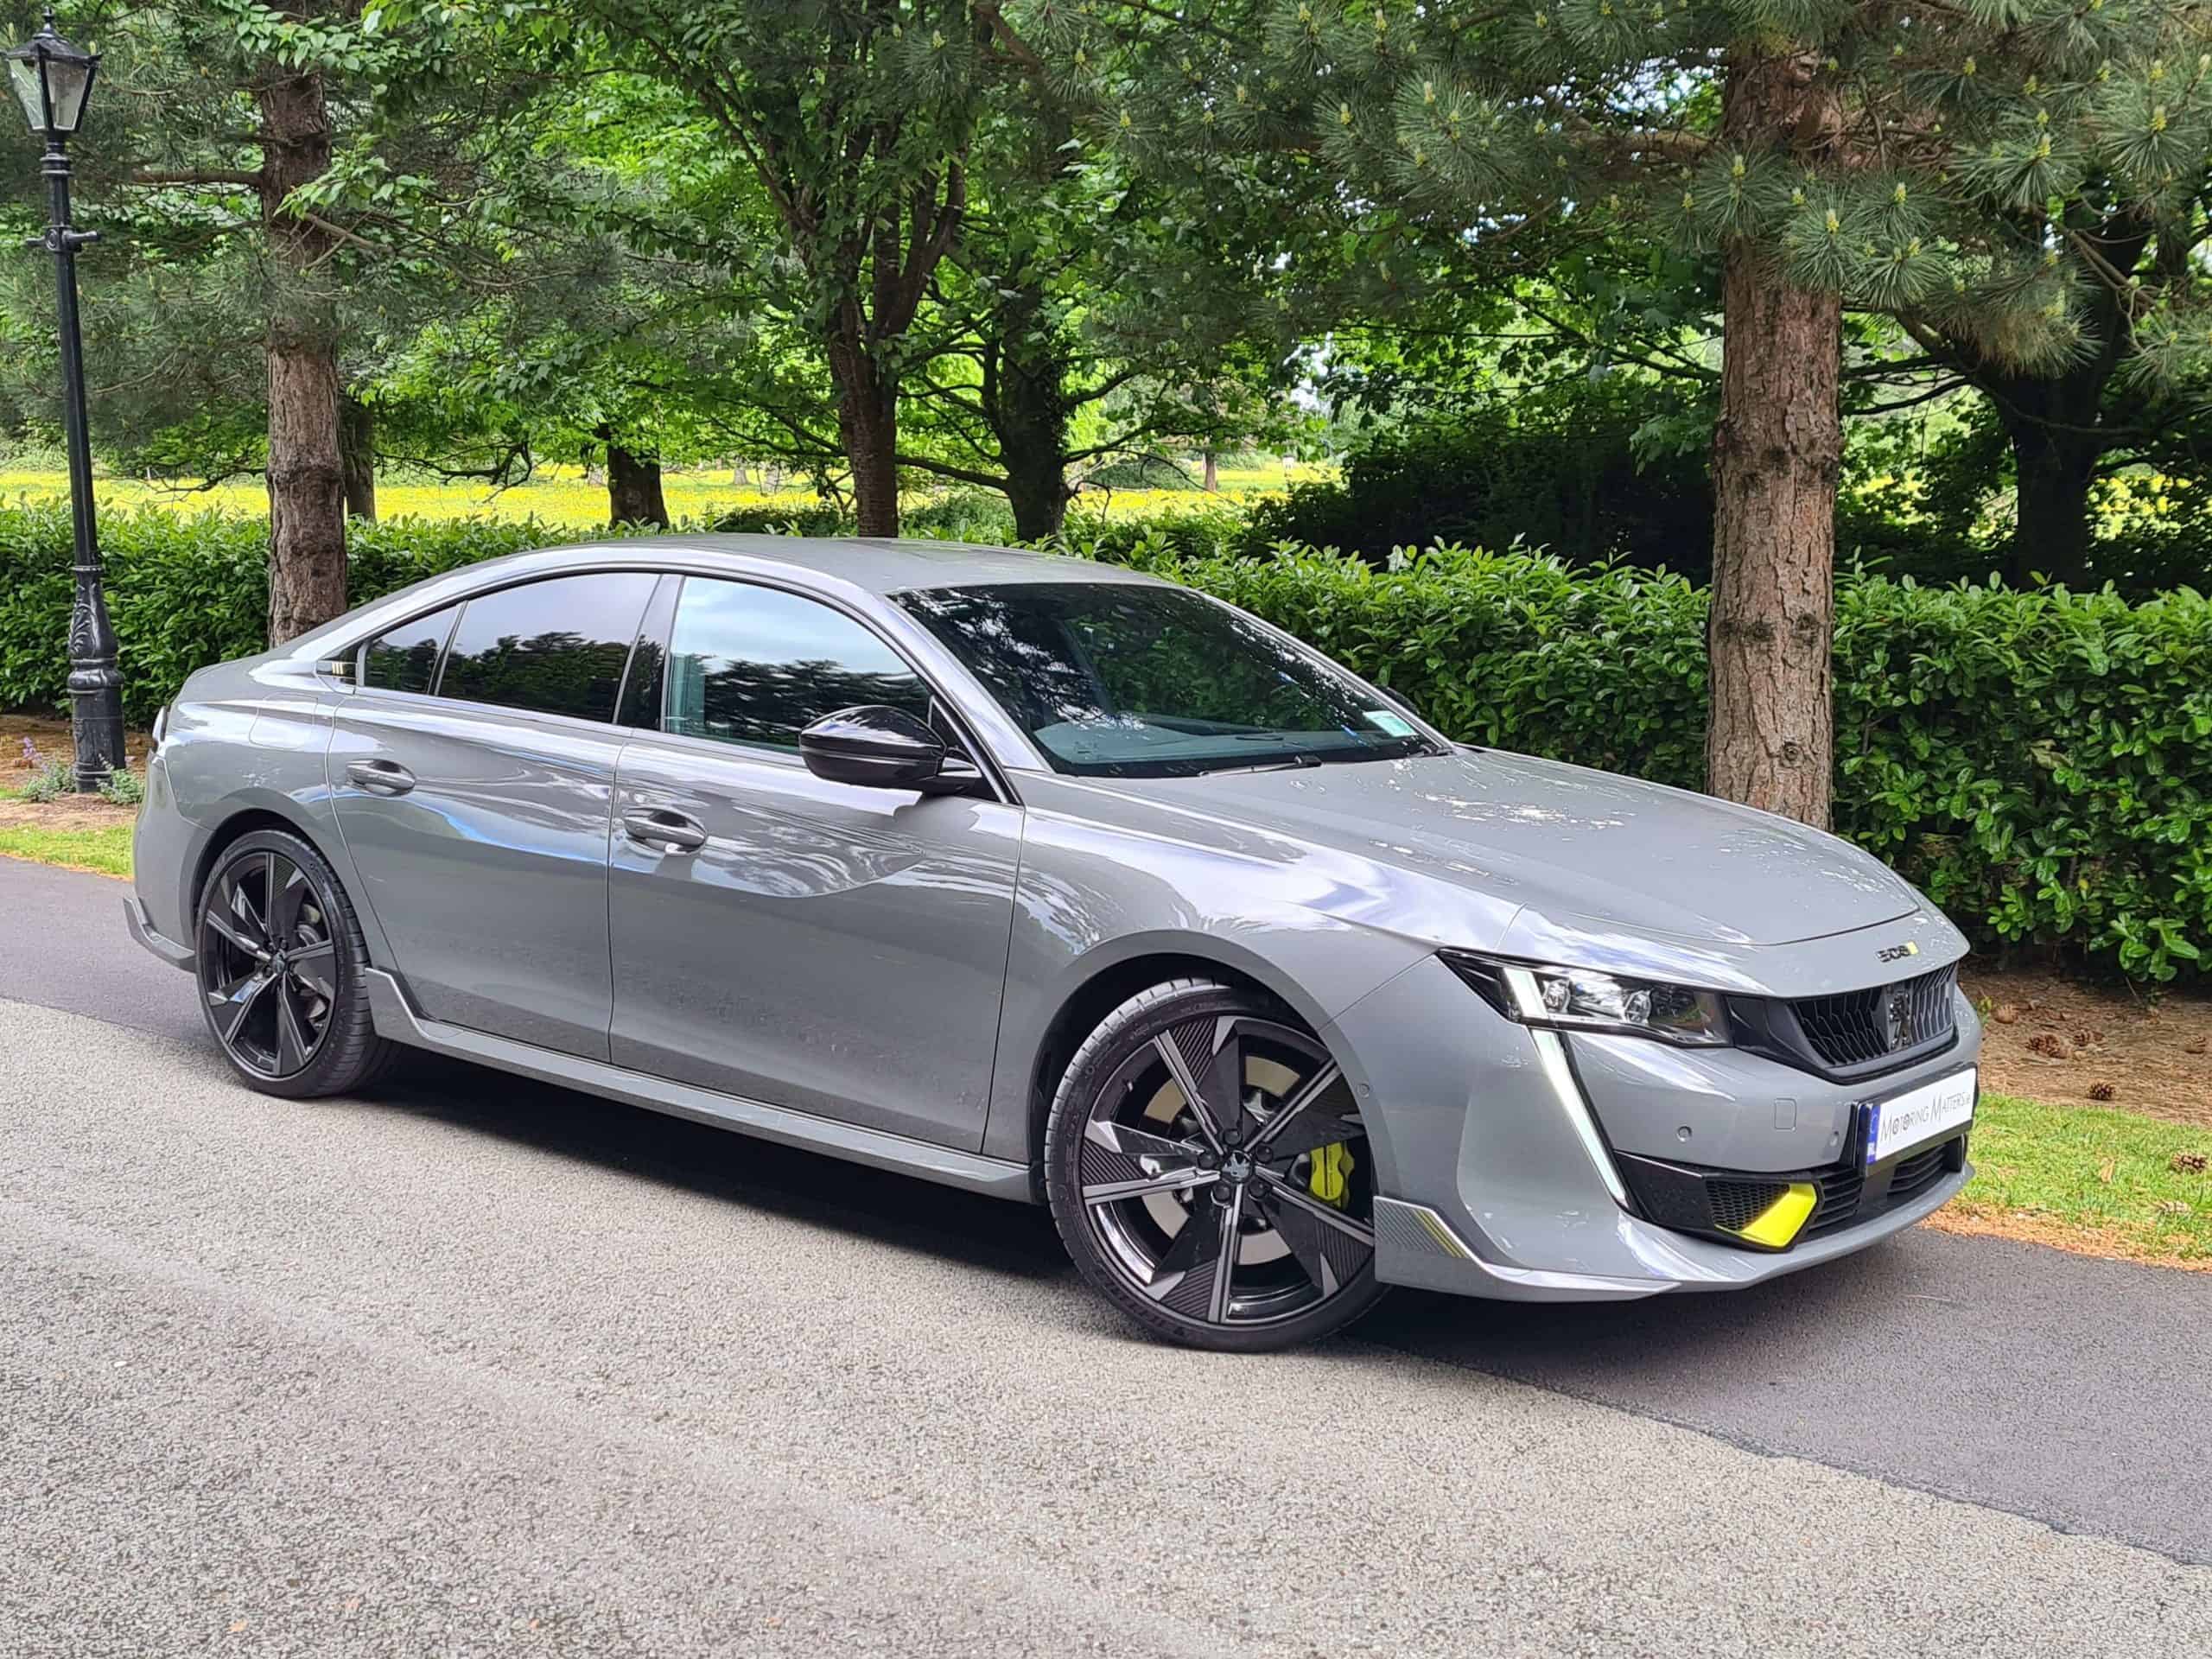 New Peugeot 508 PSE Fastback - Engineered to Perfection